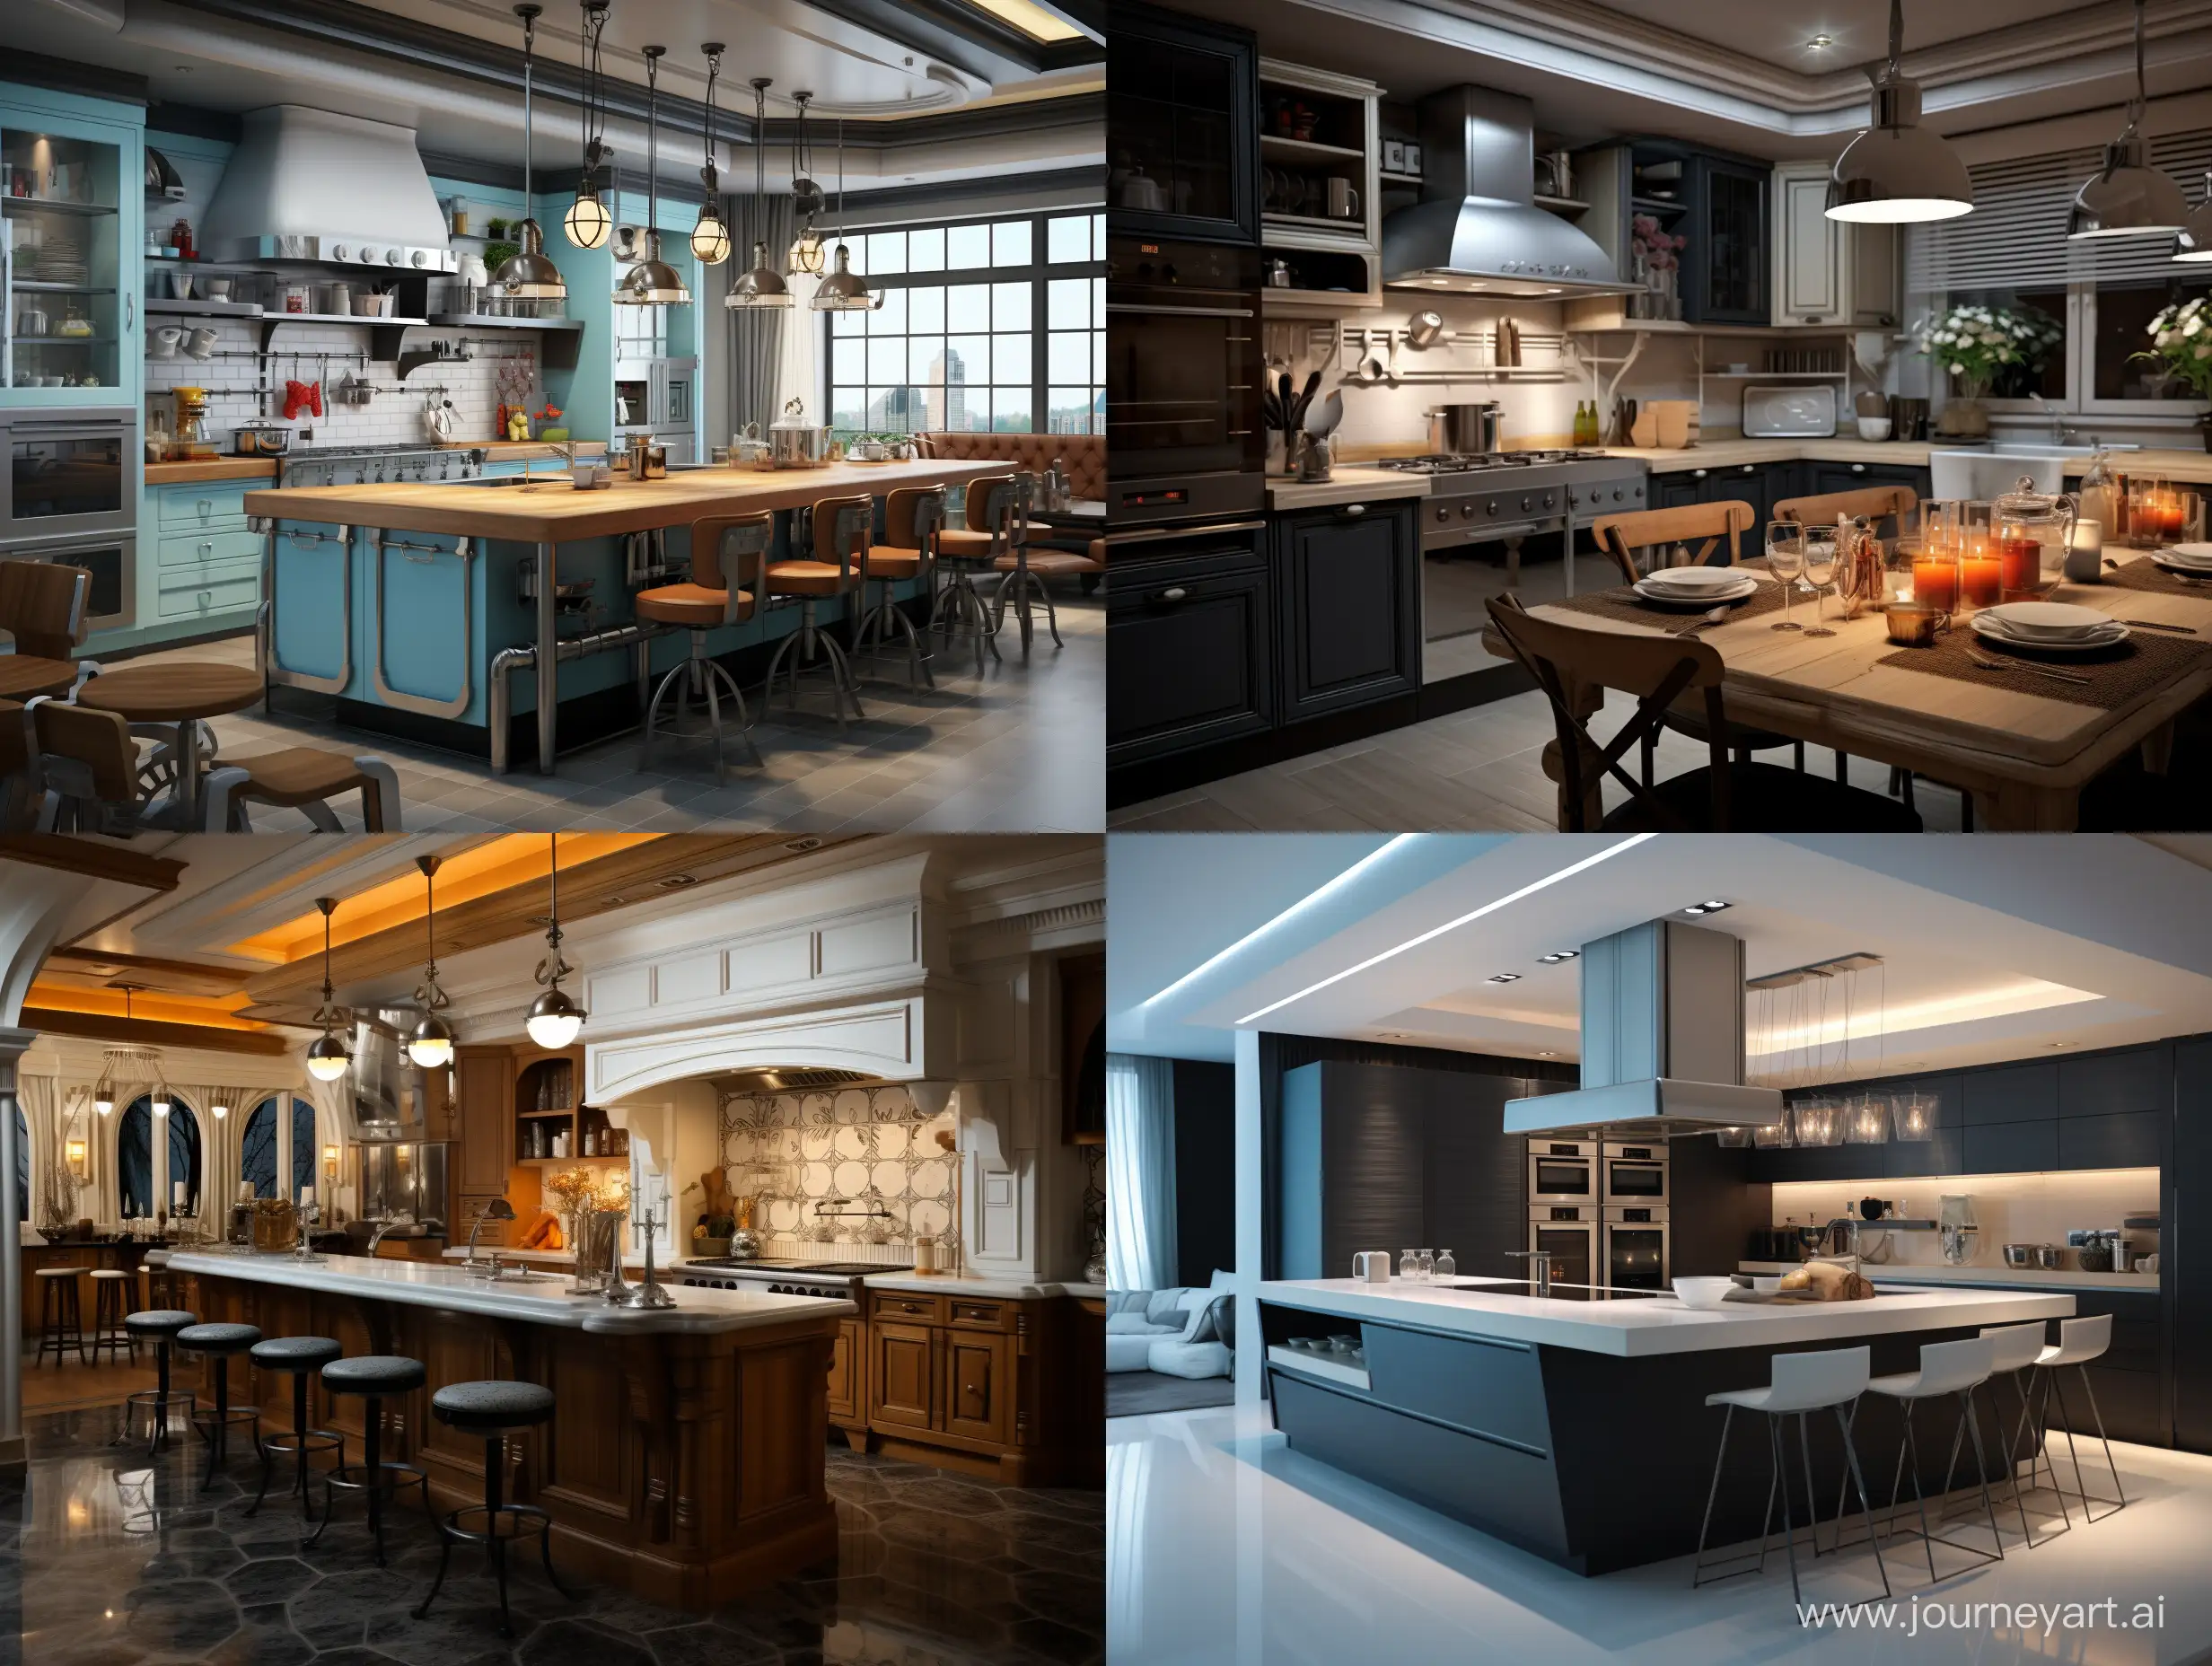 Modern-Kitchen-Electrical-Design-with-Aspect-Ratio-43